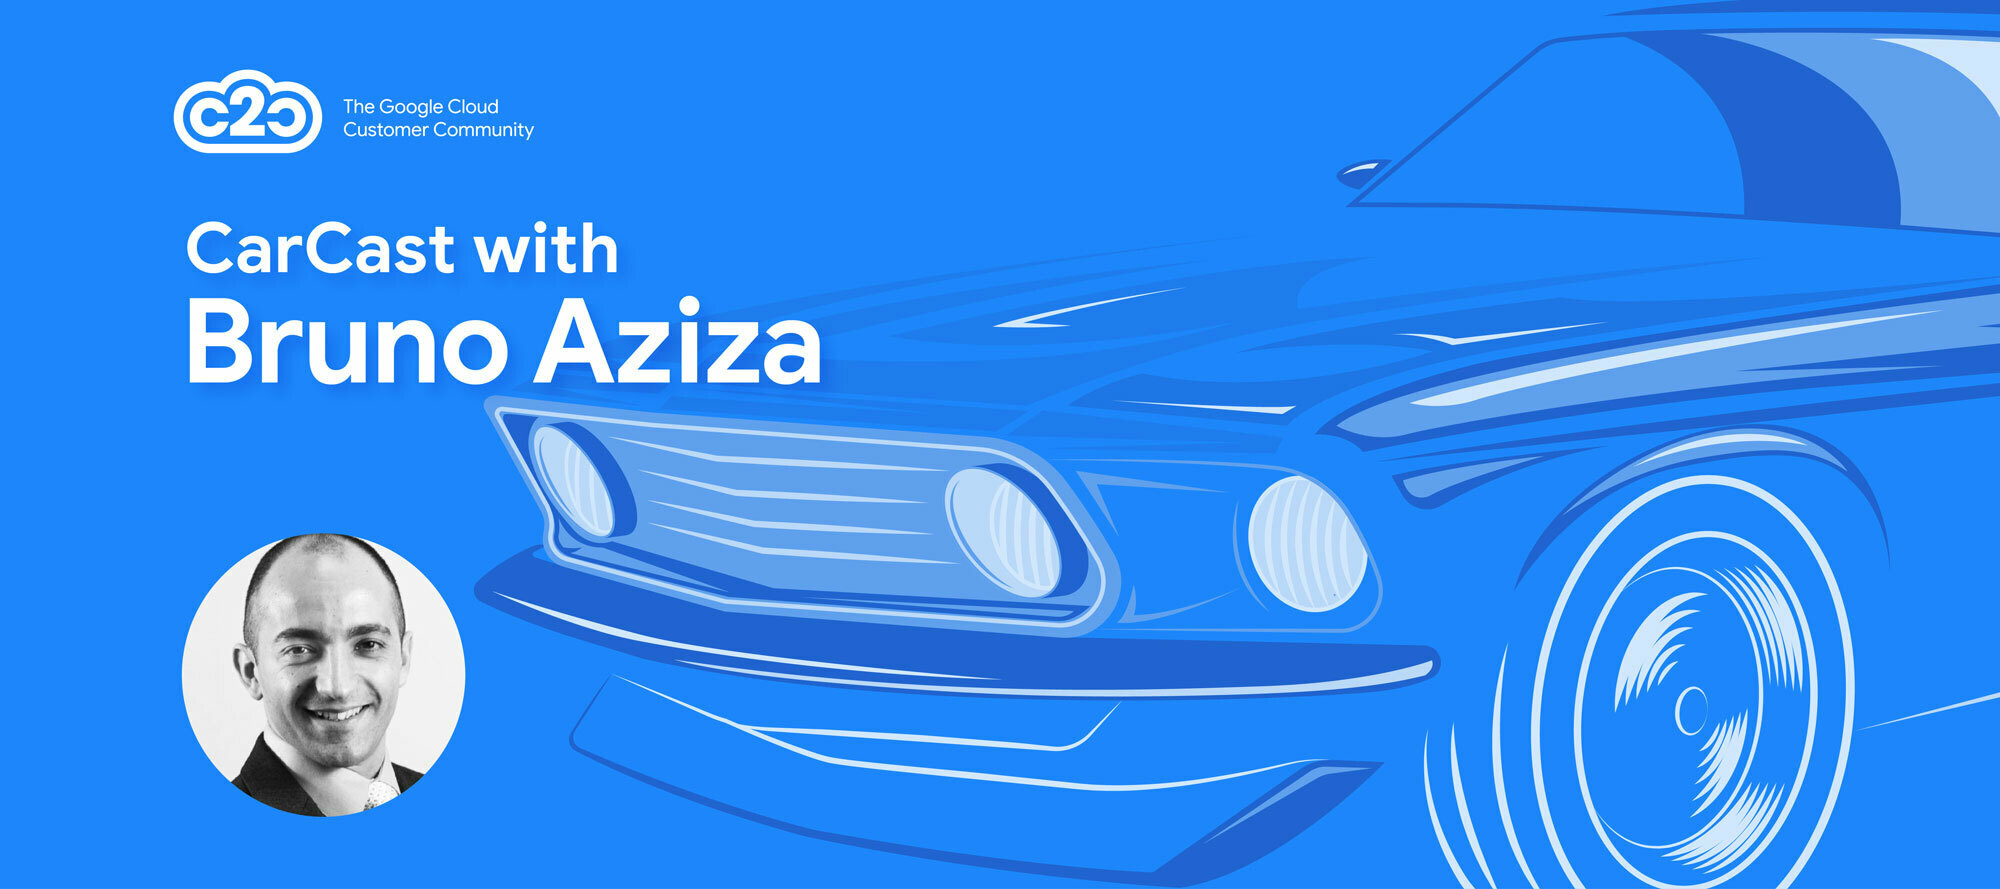 CarCast with Bruno Aziza: What's a Data Product?